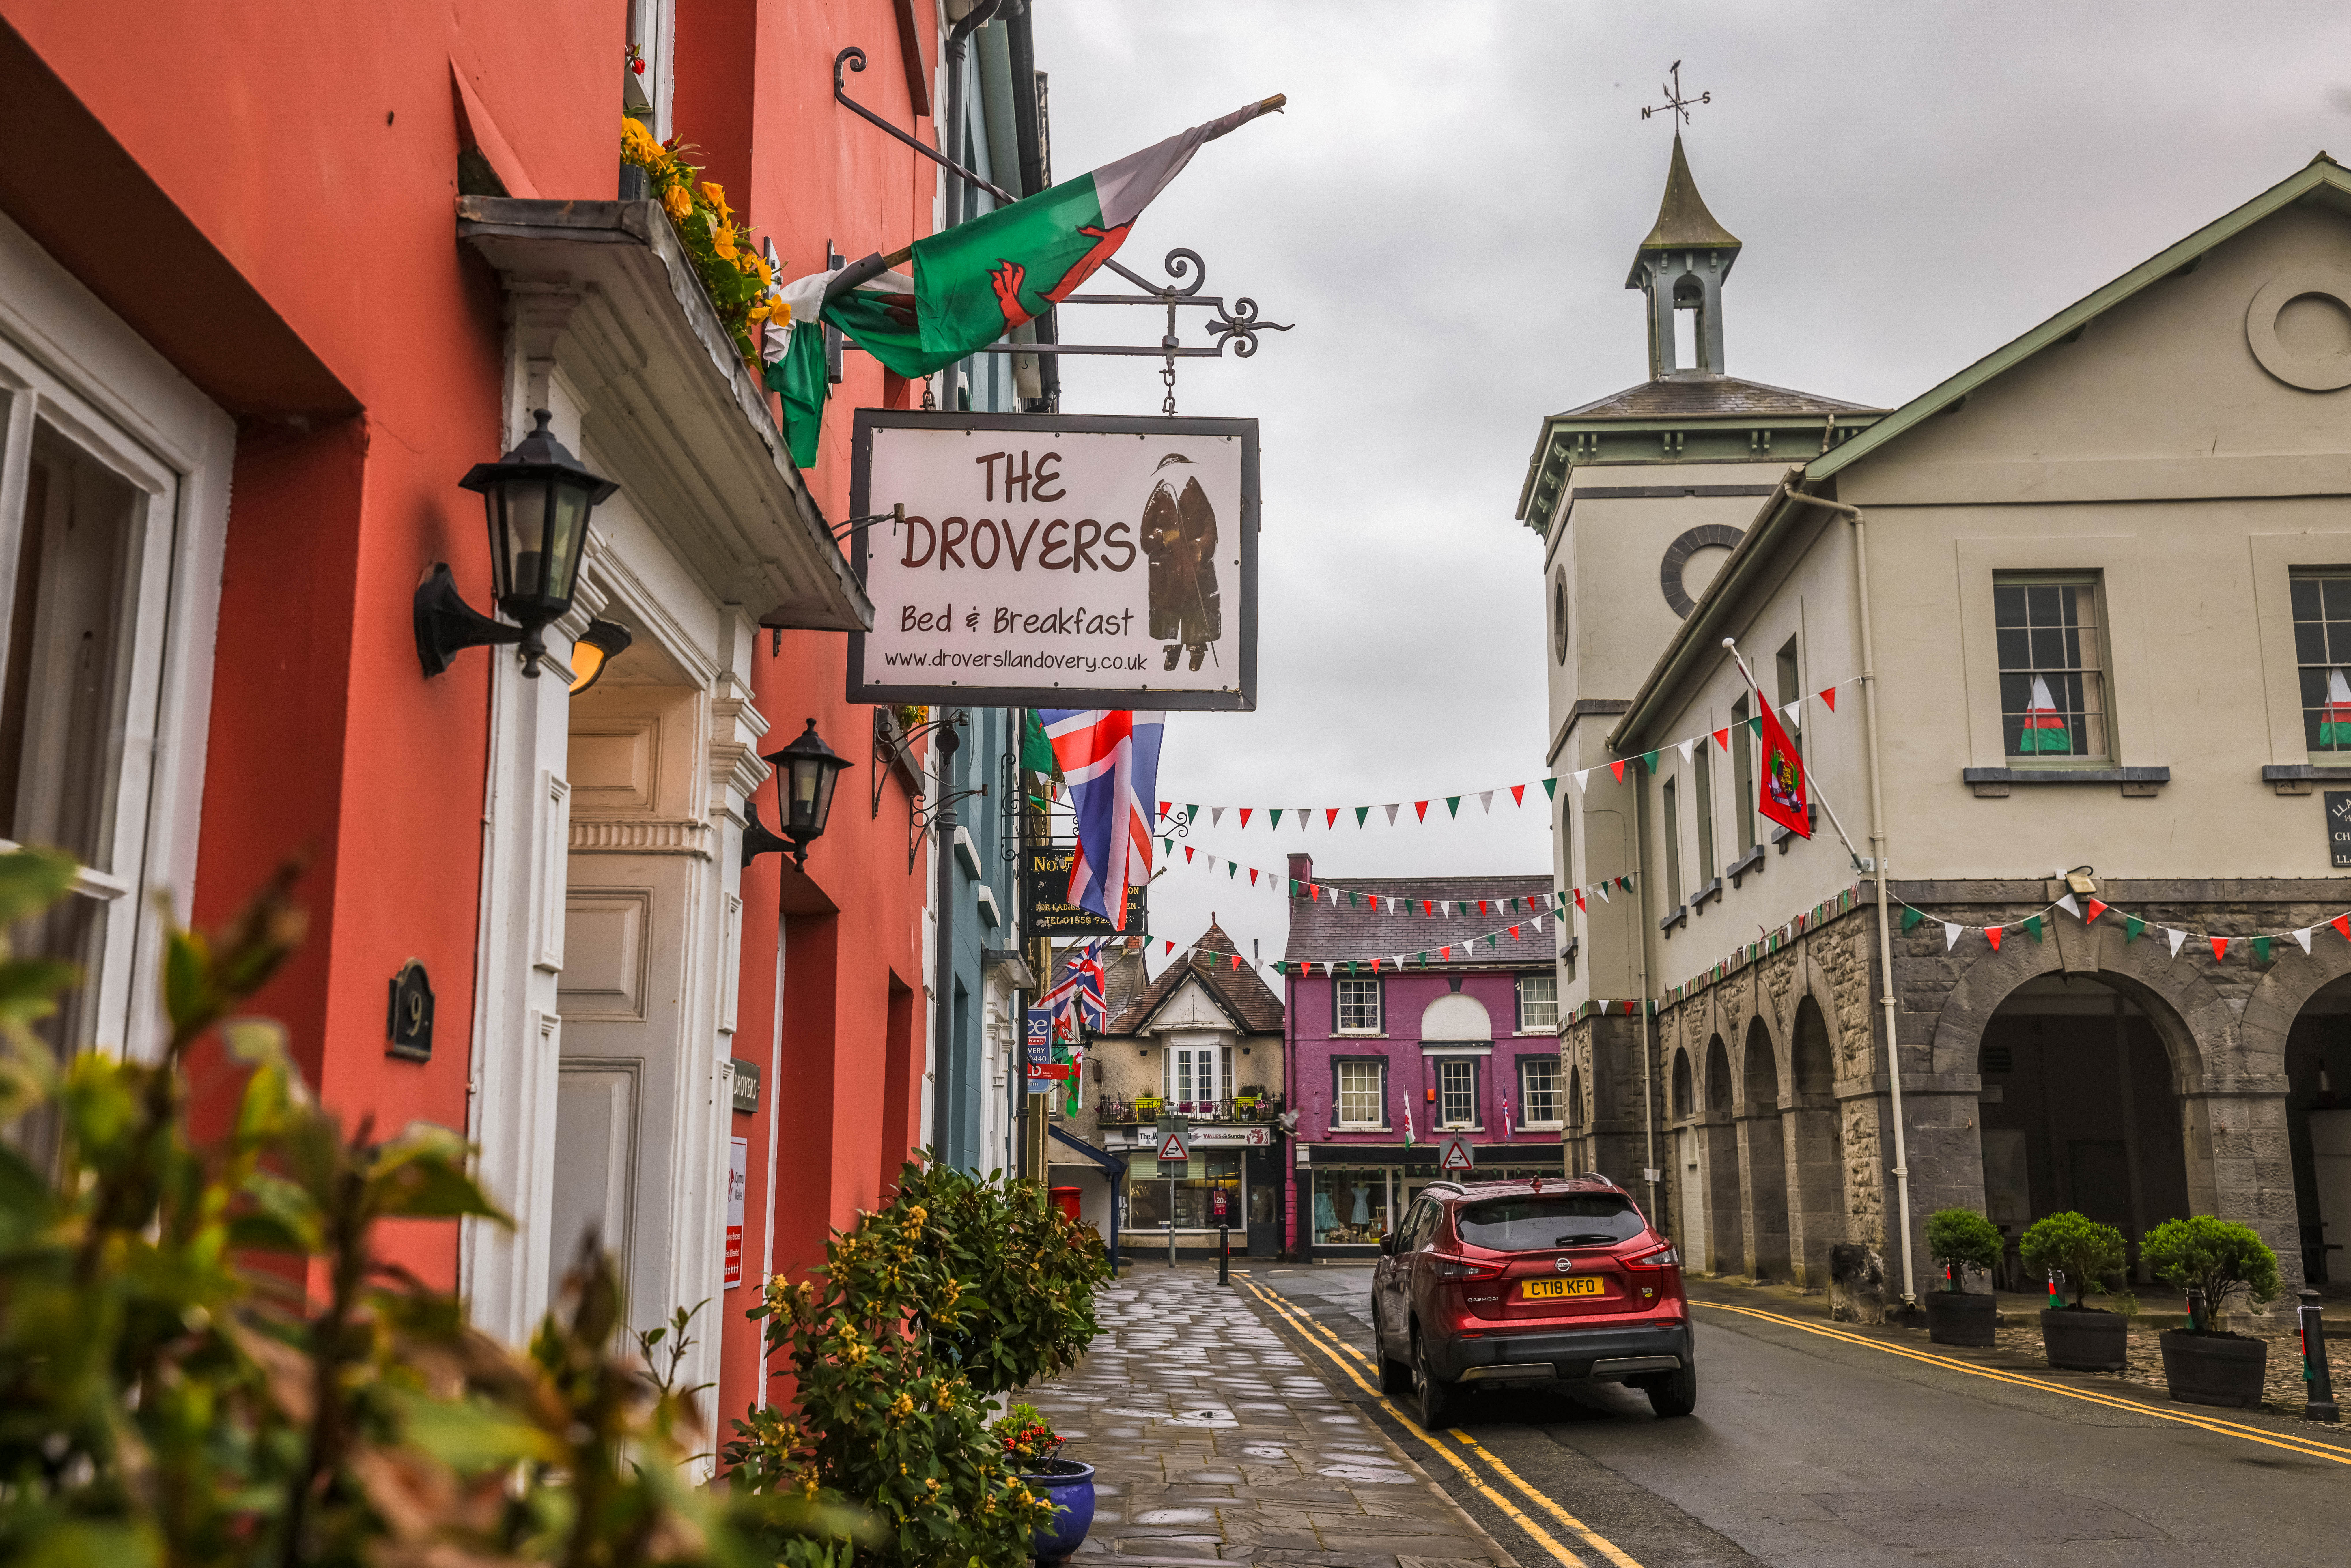 Llandovery, the drover epicentre: at one point, more than 30,000 cows were driven from here to England